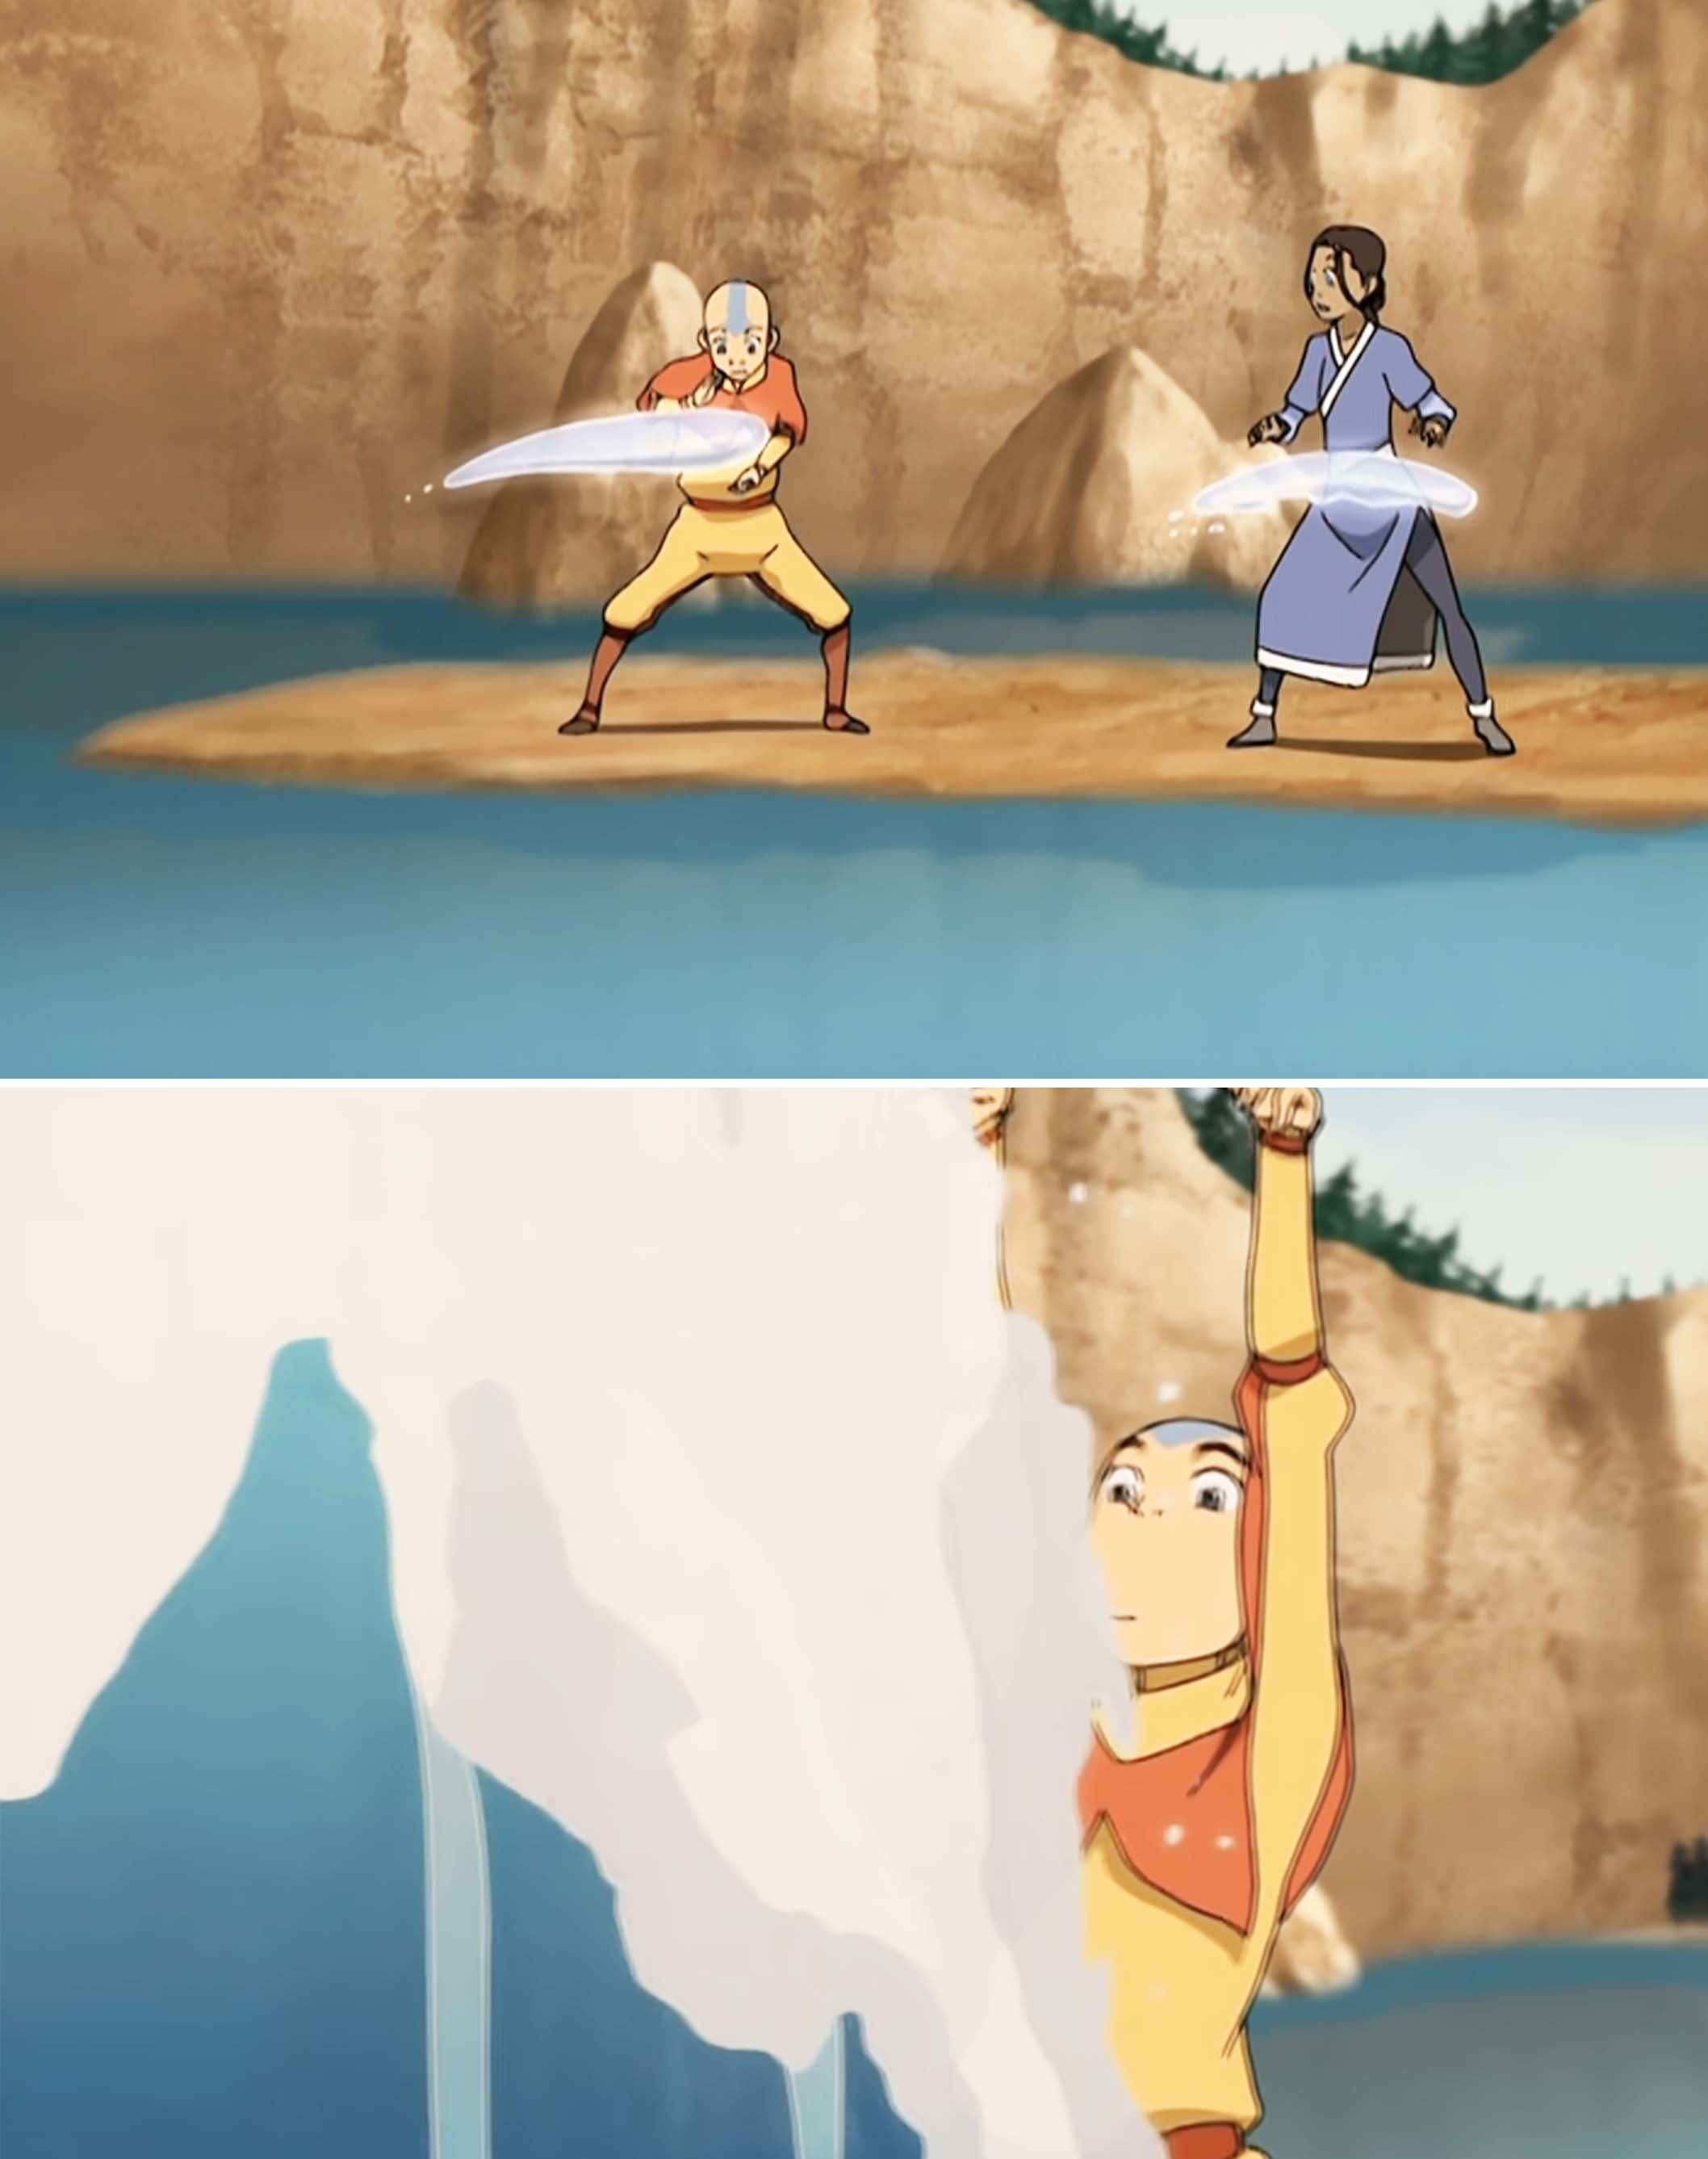 the animated character bending water